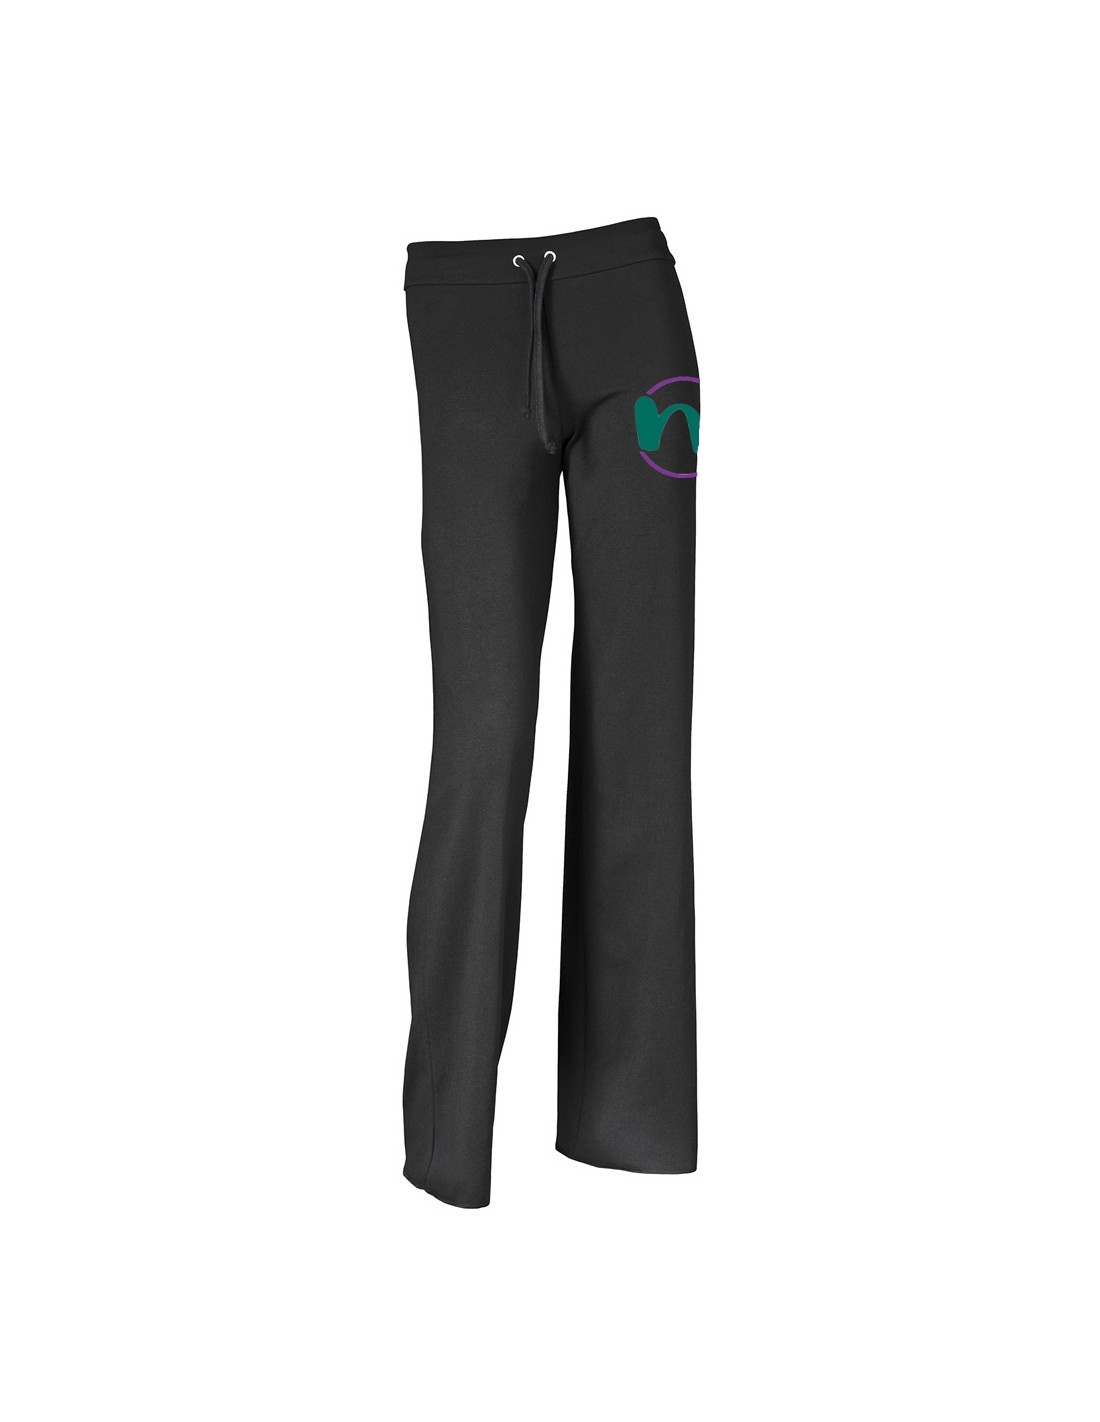 MOVING MOTIONS JAZZPANT ADULT